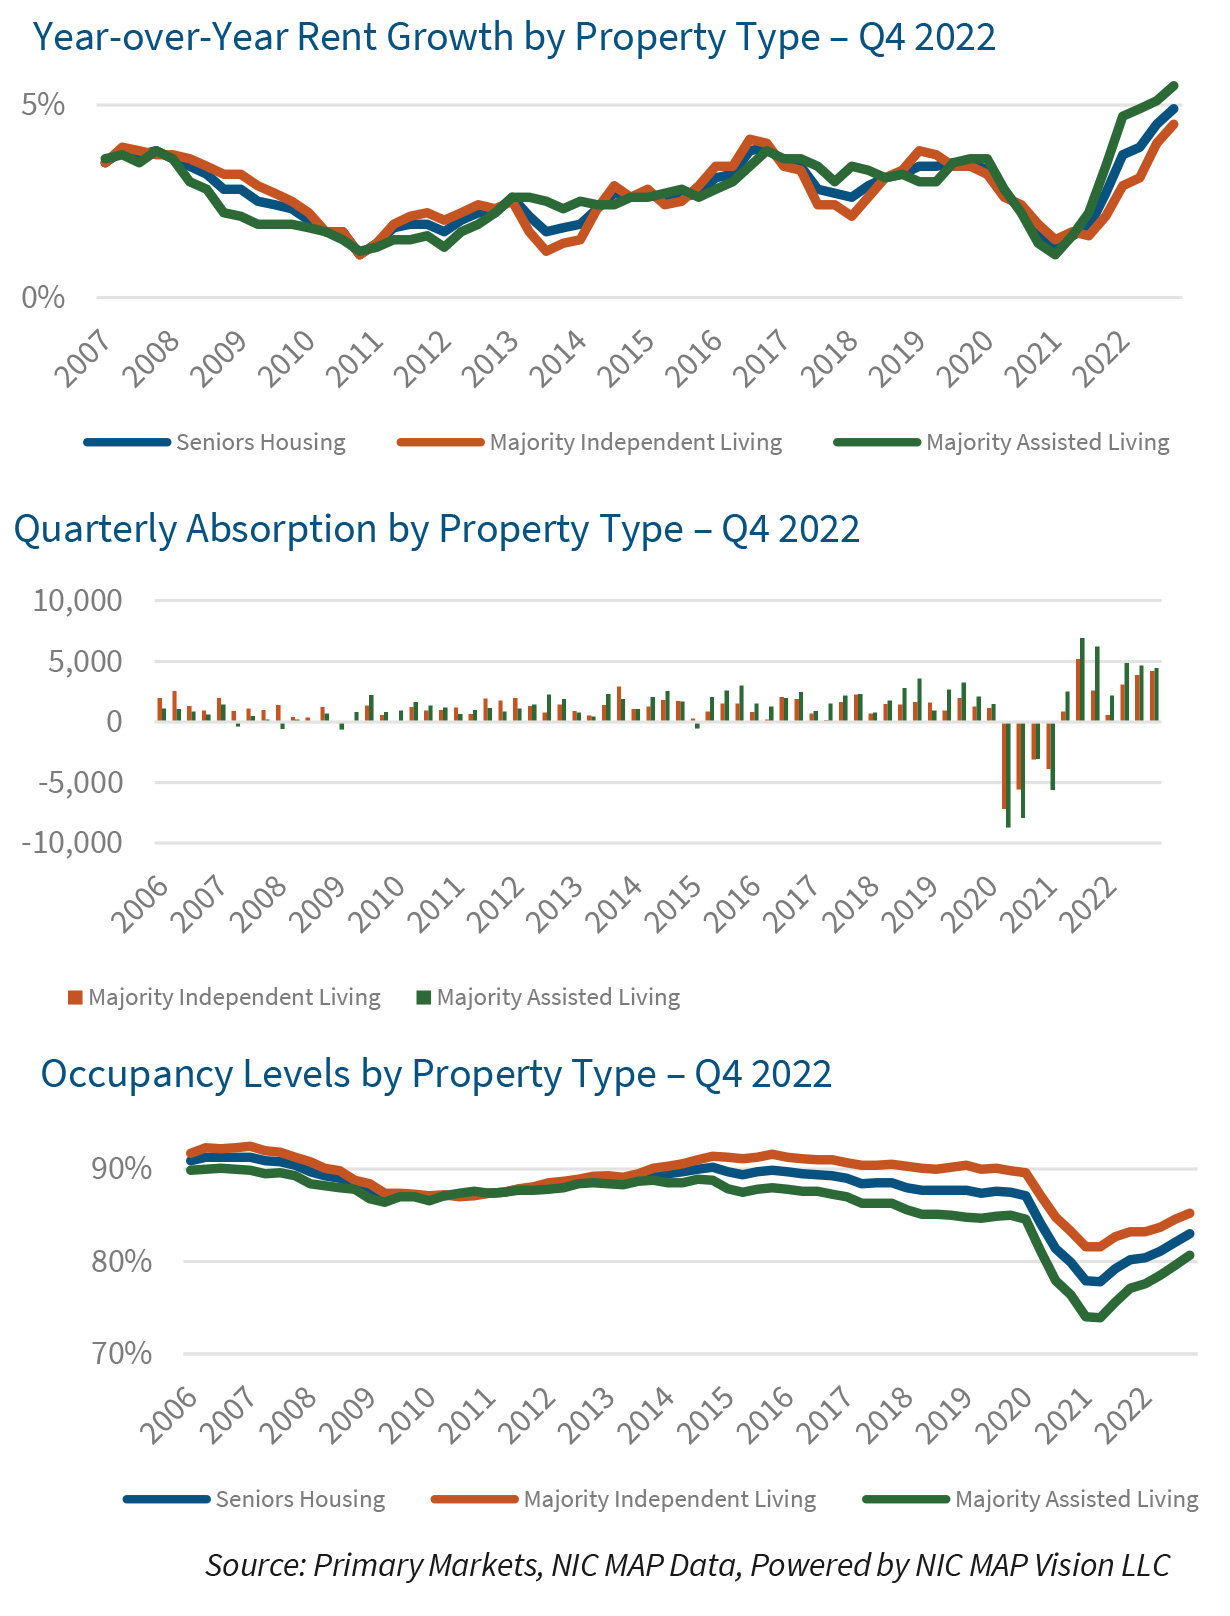 Year-over-Year Rent Growth by Property Type – Q4 2022 | Quarterly Absorption by Property Type – Q4 2022 | Occupancy Levels by Property Type – Q4 2022